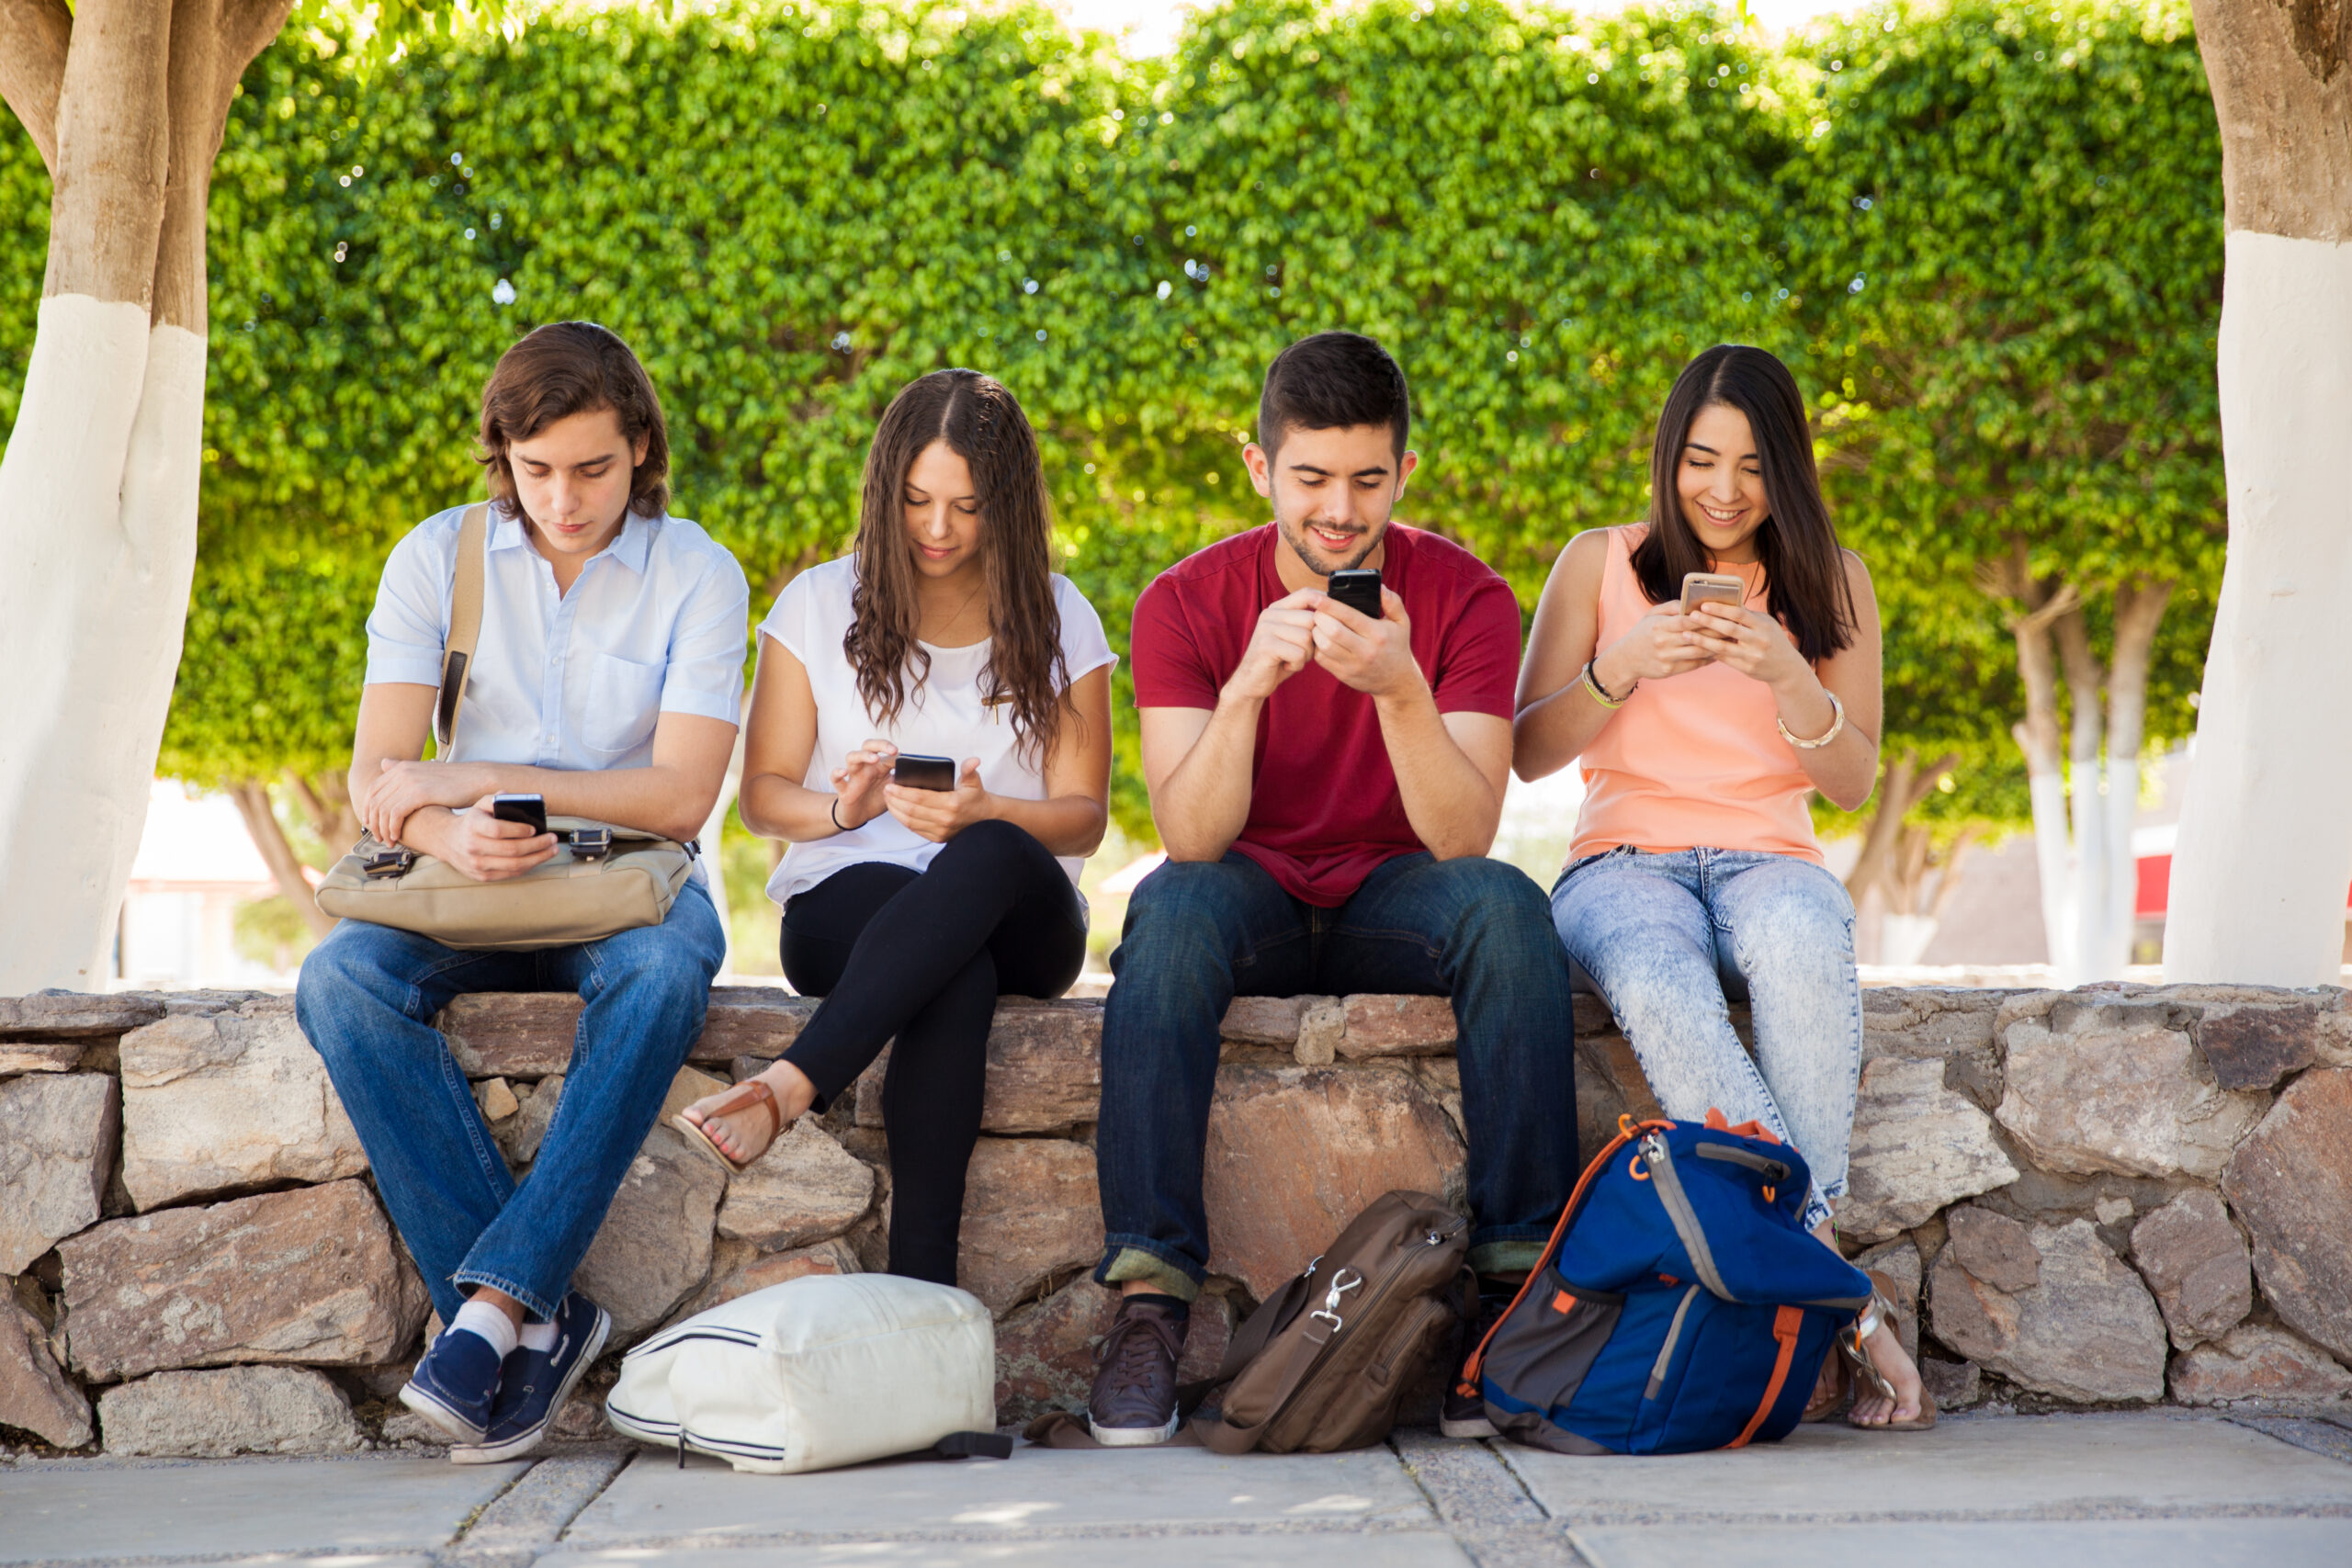 Your teen's world is in their phone